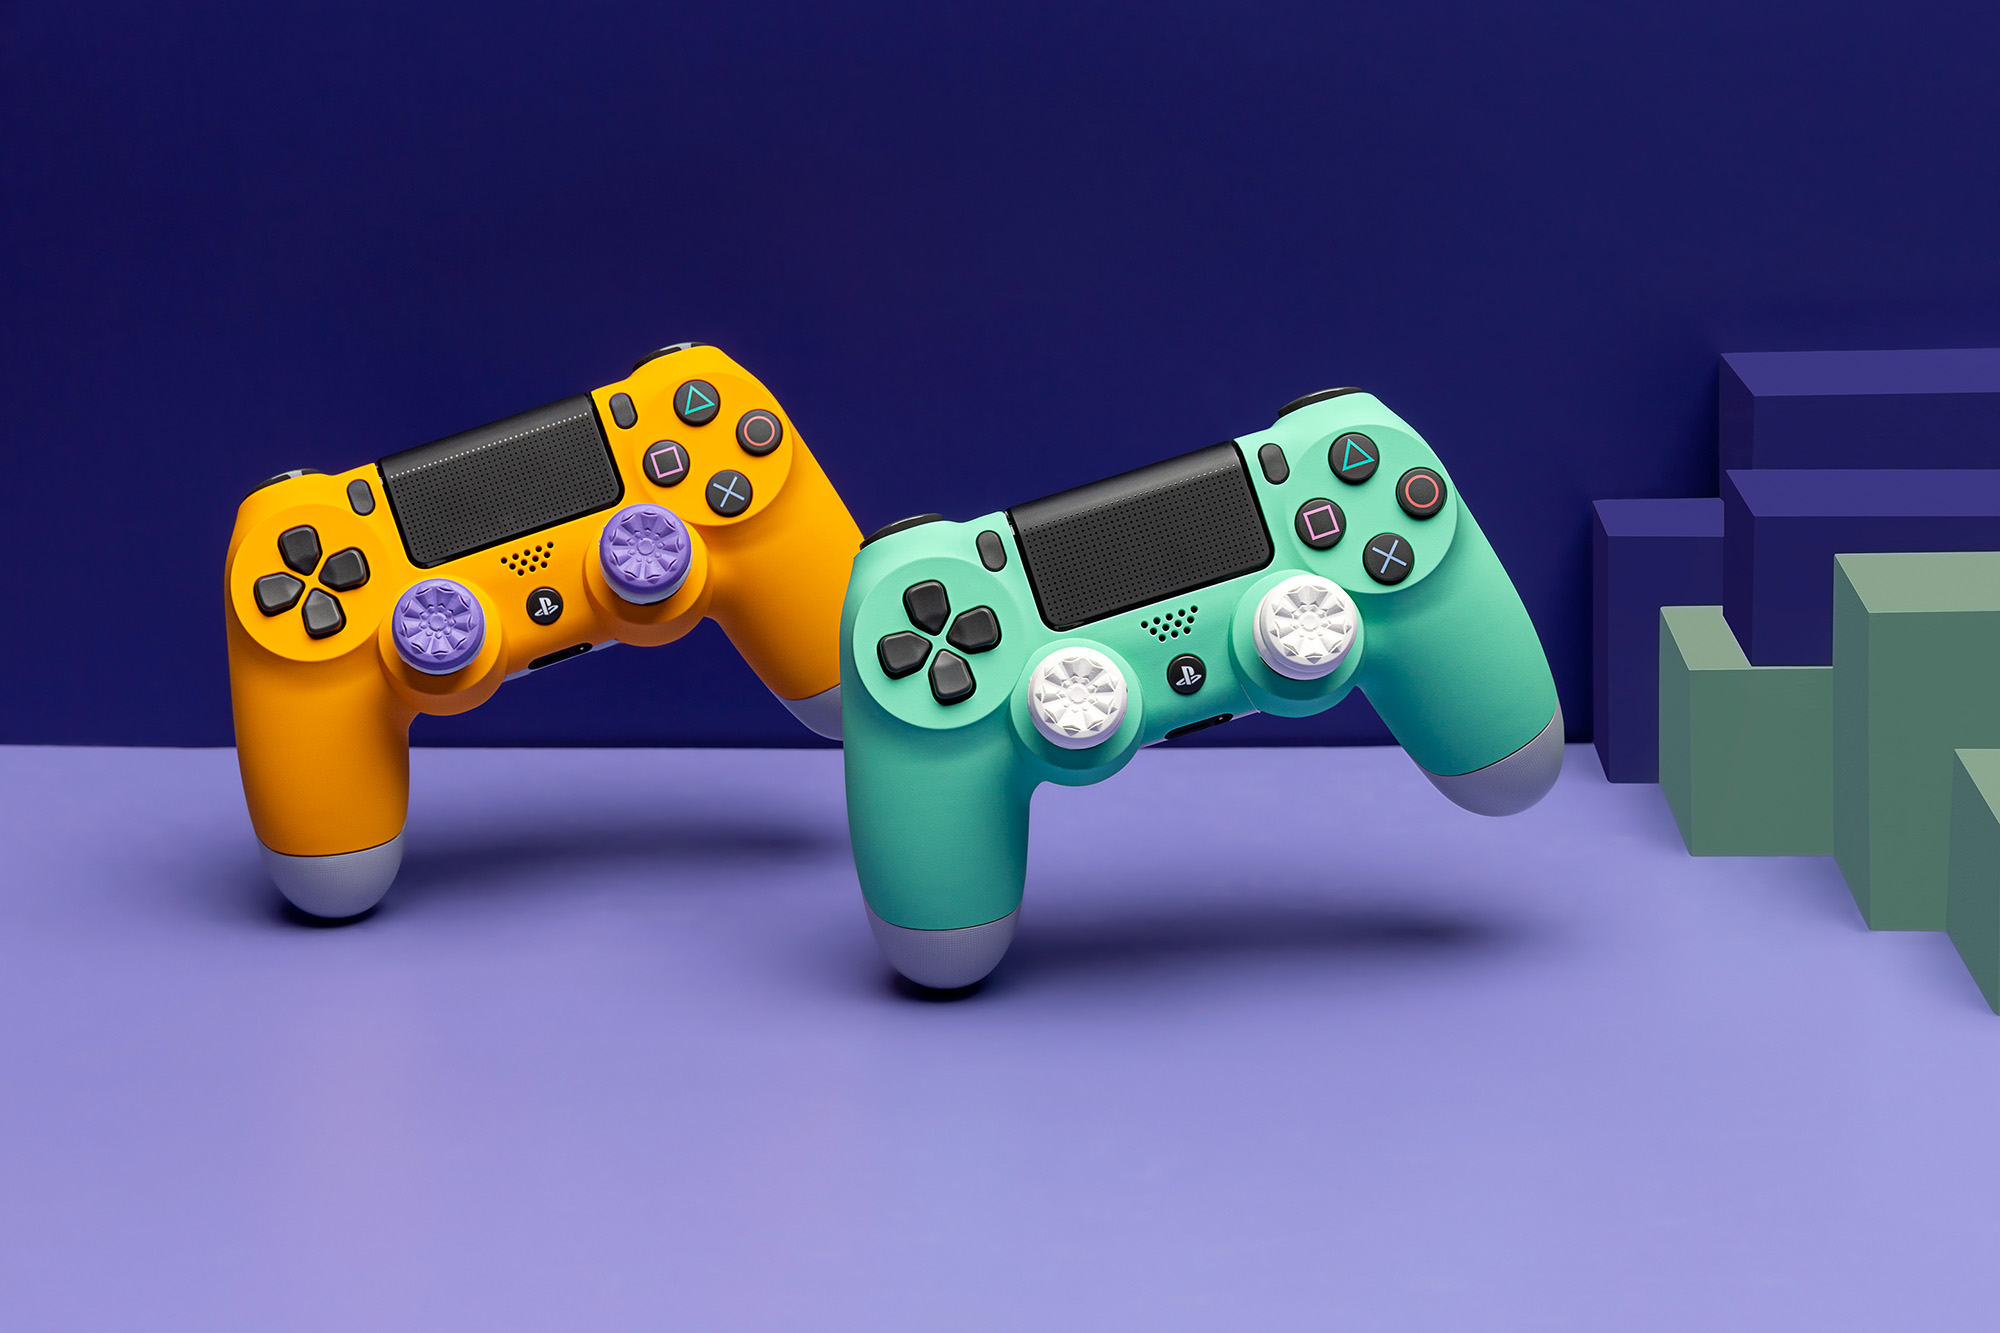 Styled product photography of orange playstation controller with purple thumbsticks next to a mint colored playstation controller with white thumbsticks